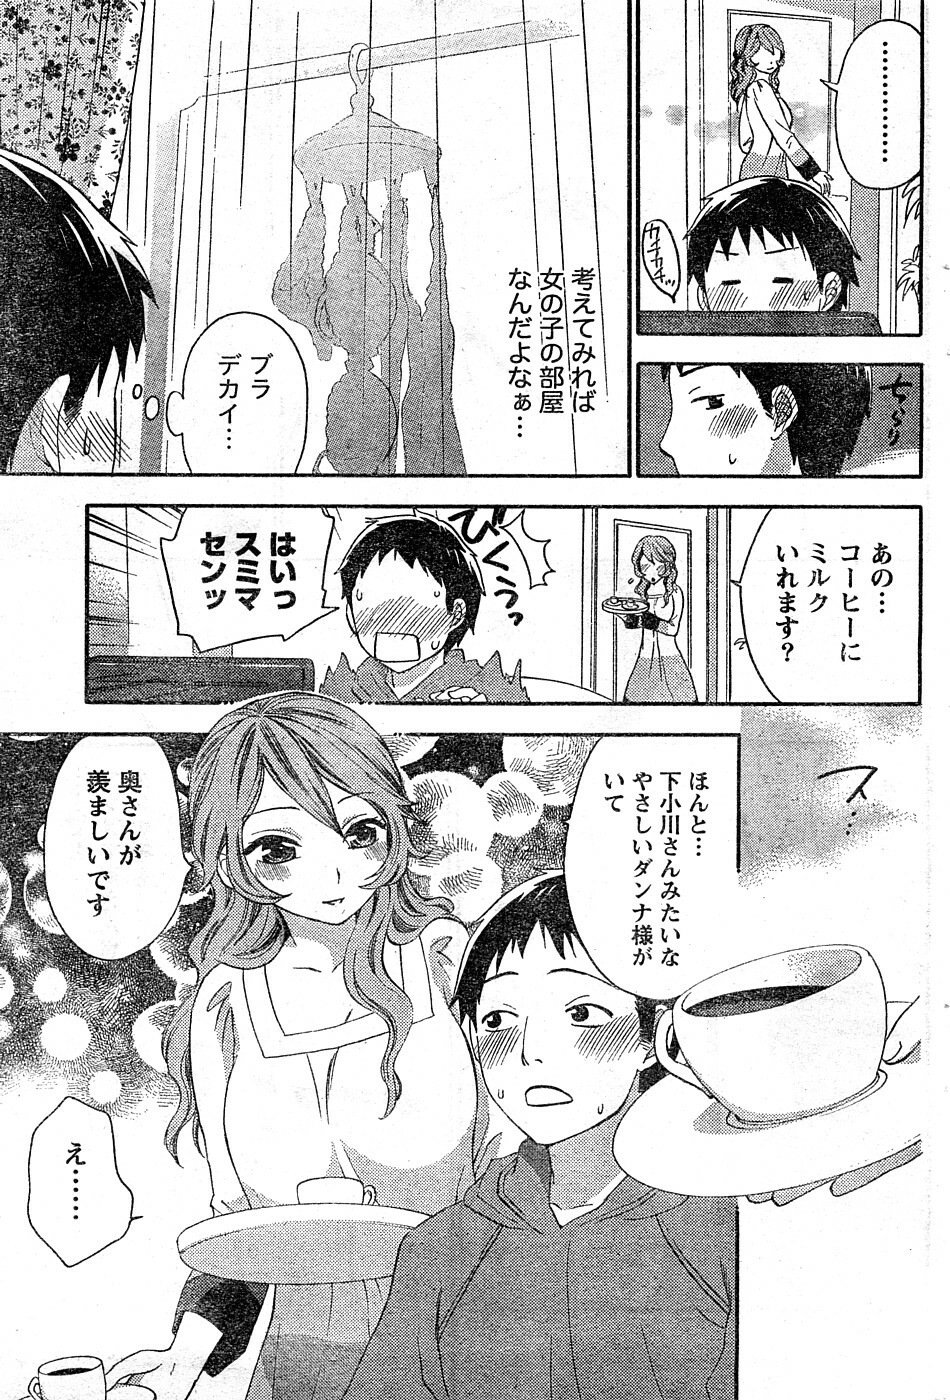 Monthly Vitaman 2009-02 [Incomplete] page 38 full